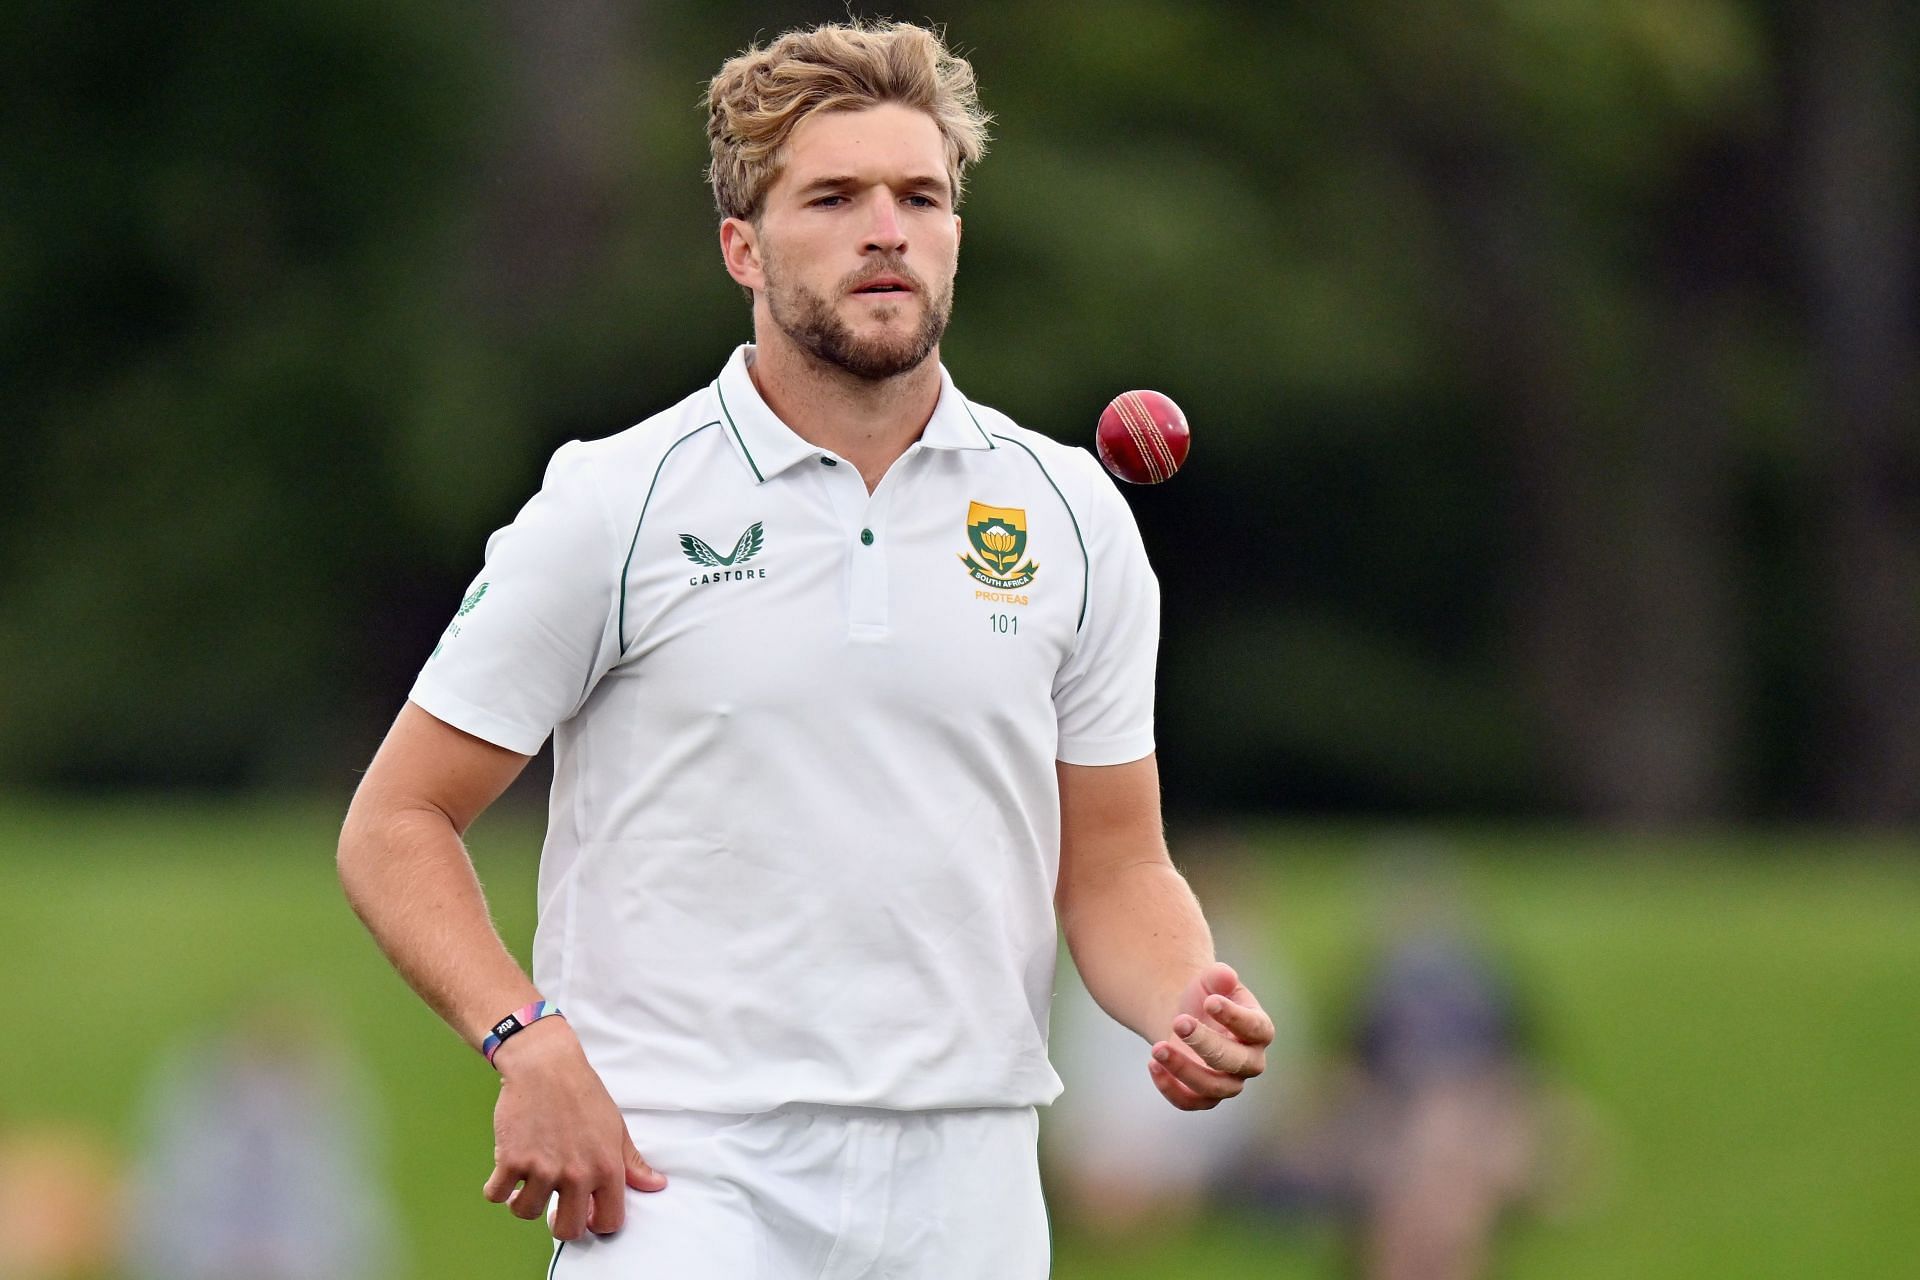 Wiaan Mulder could prove to be pivotal in this clash